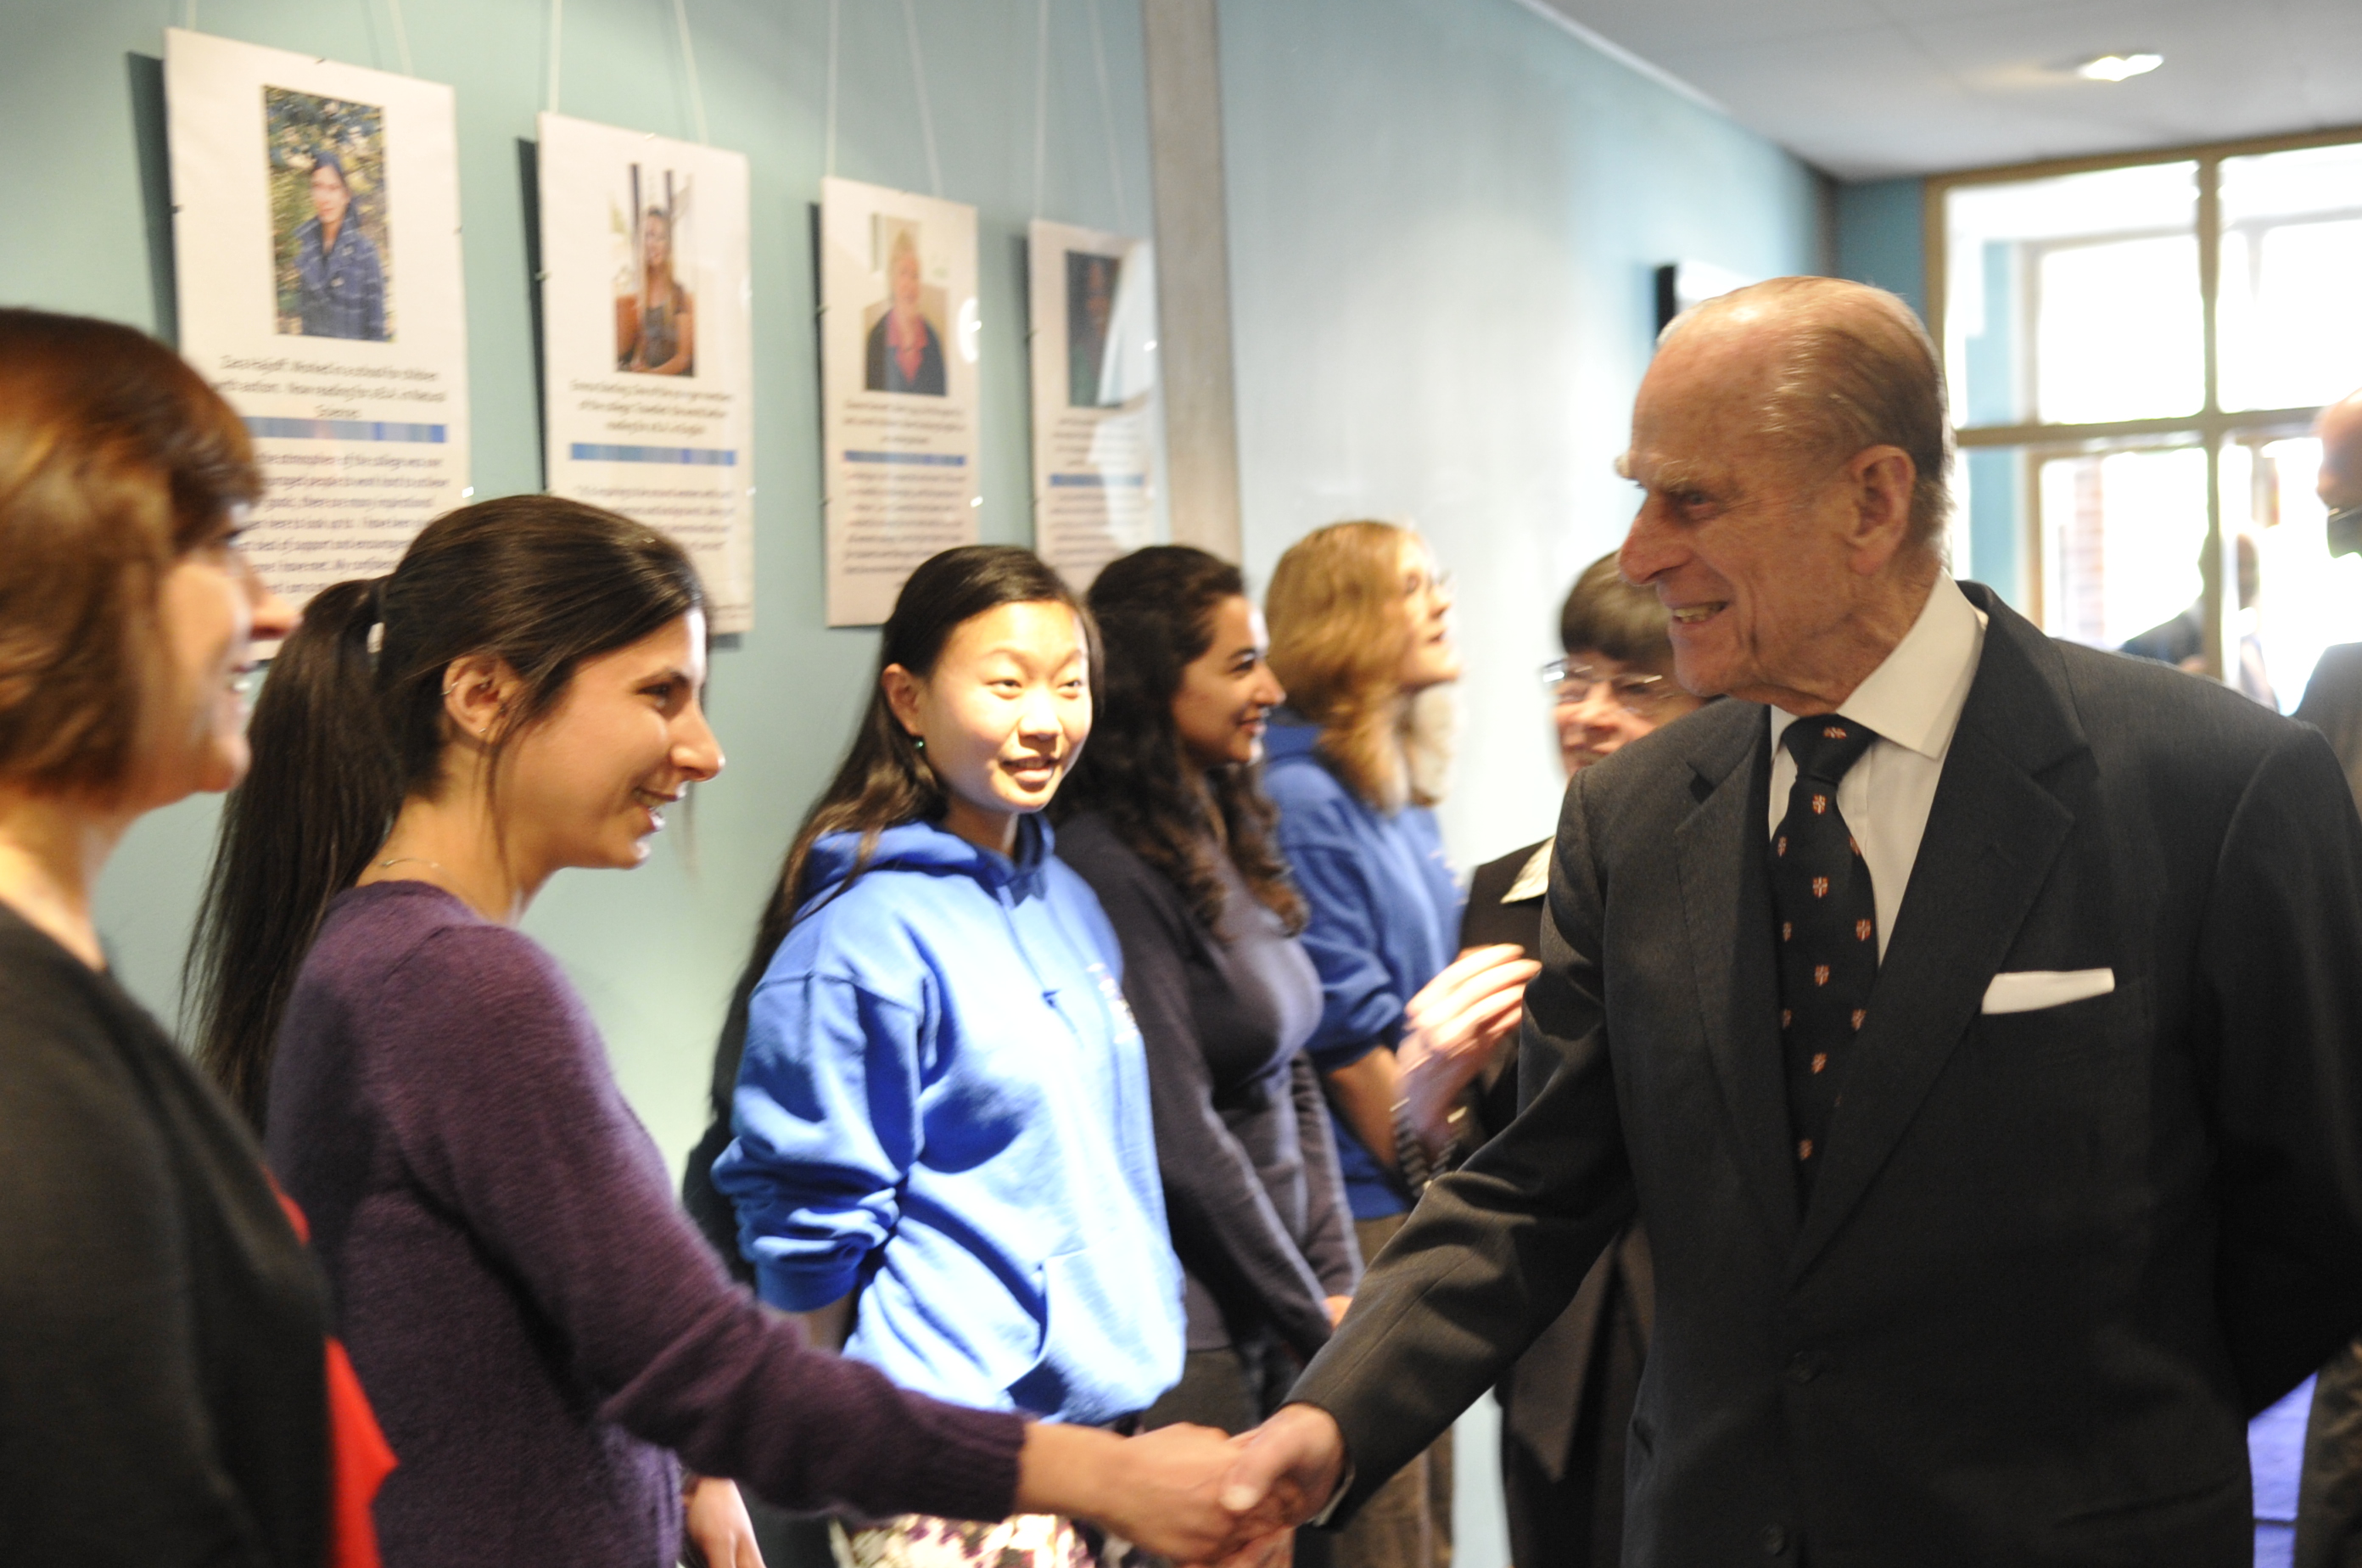 Prince Philip visit to the College in 2011